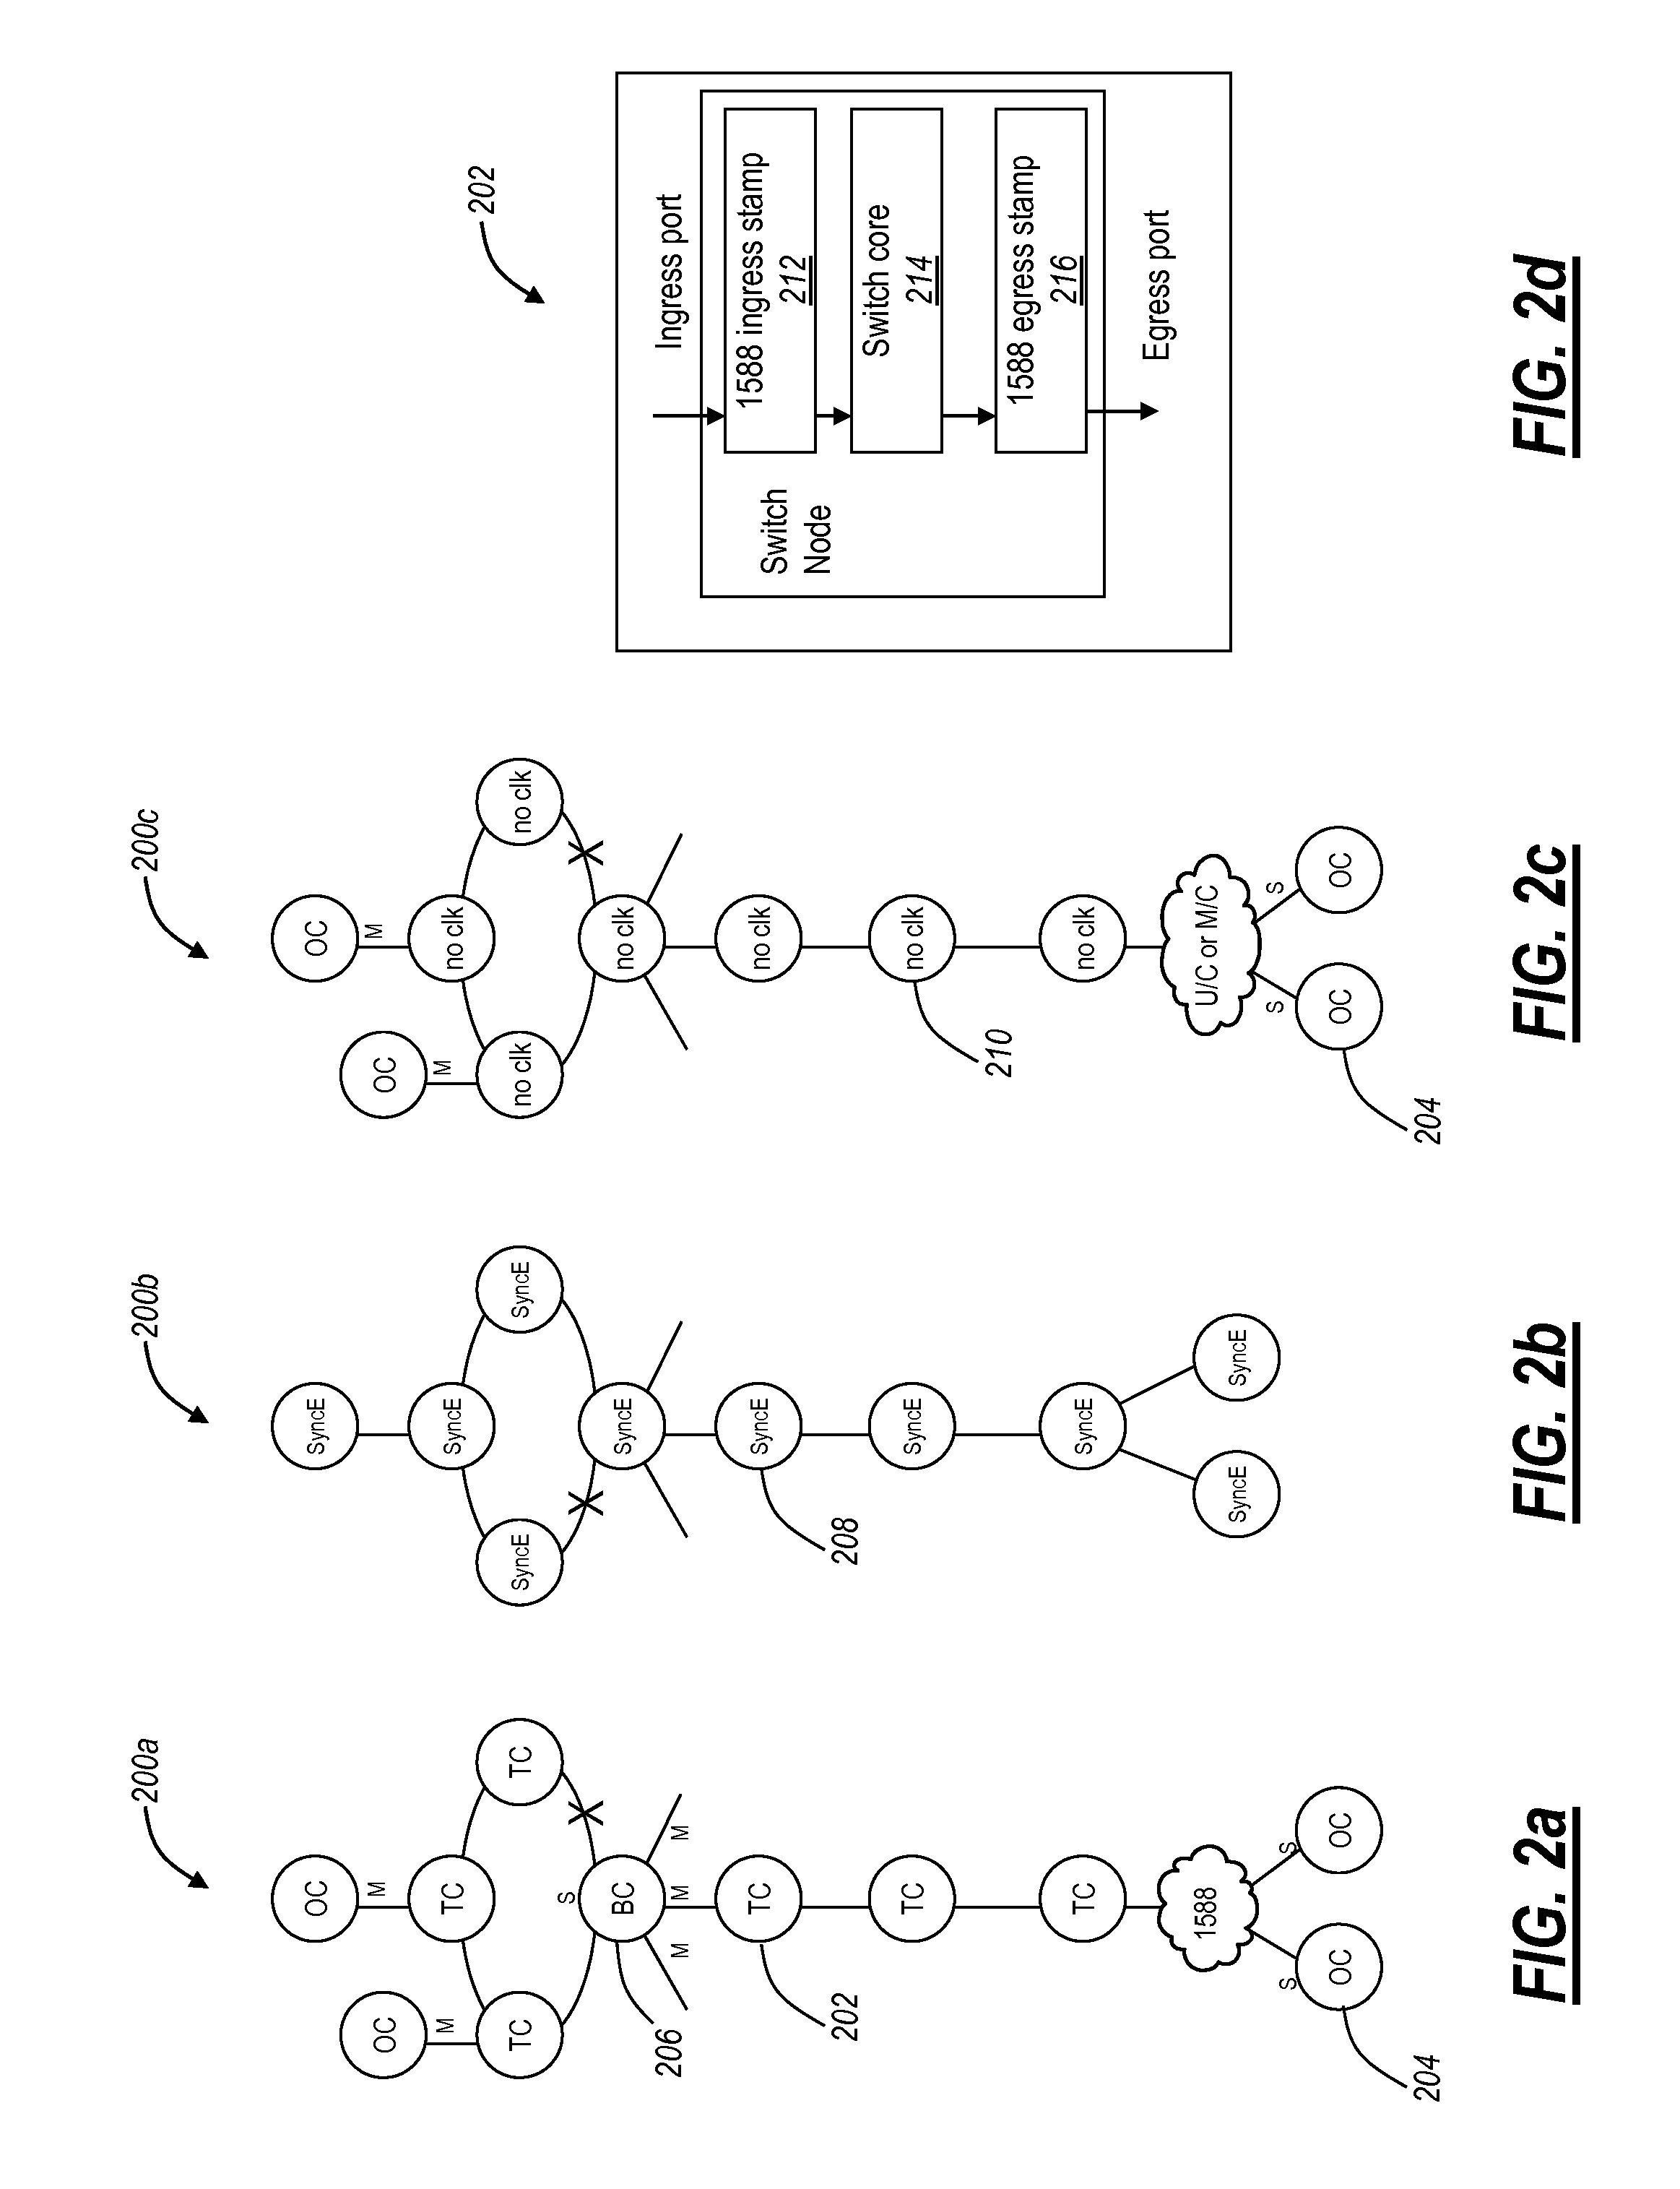 Ethernet network synchronization systems and methods